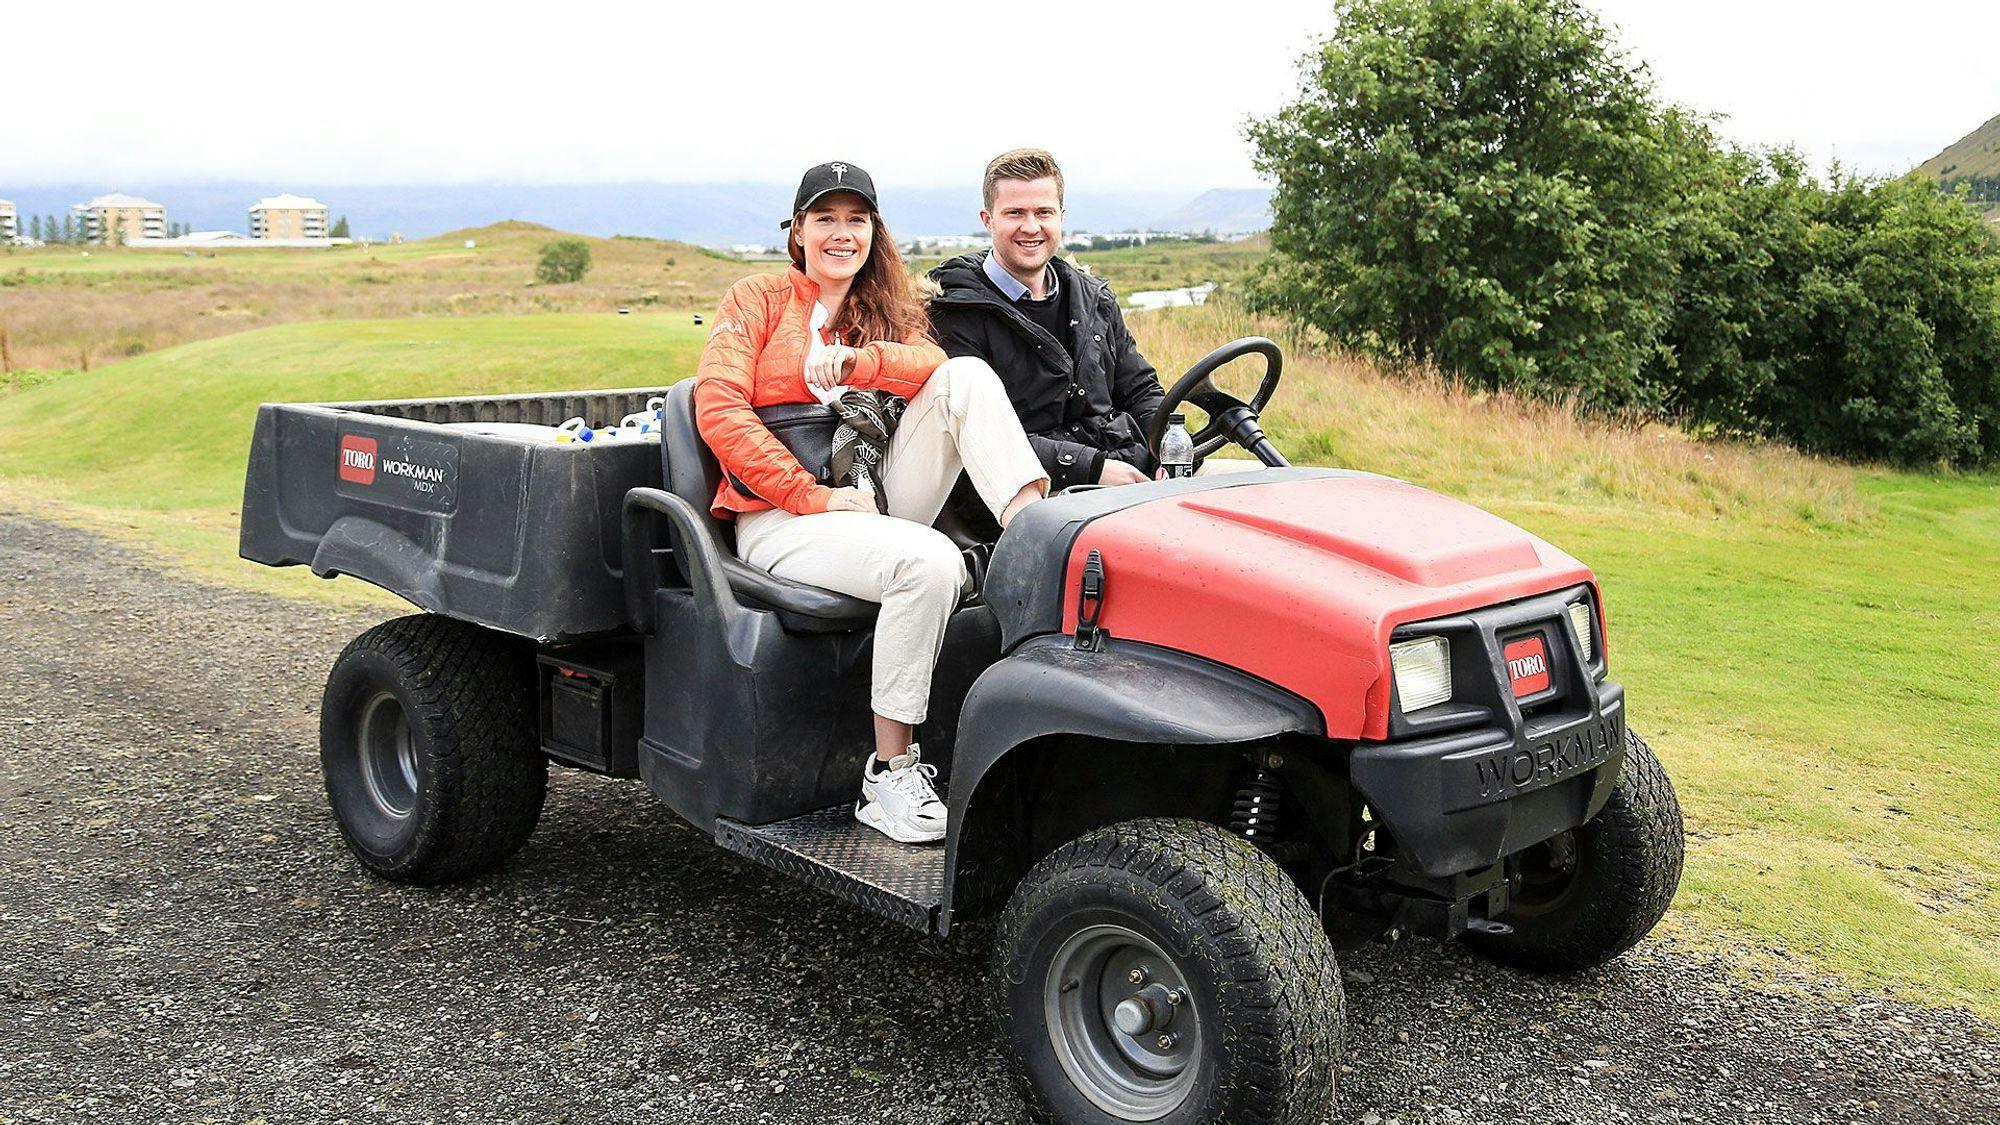 Two individuals seated on a red and black golf utility vehicle